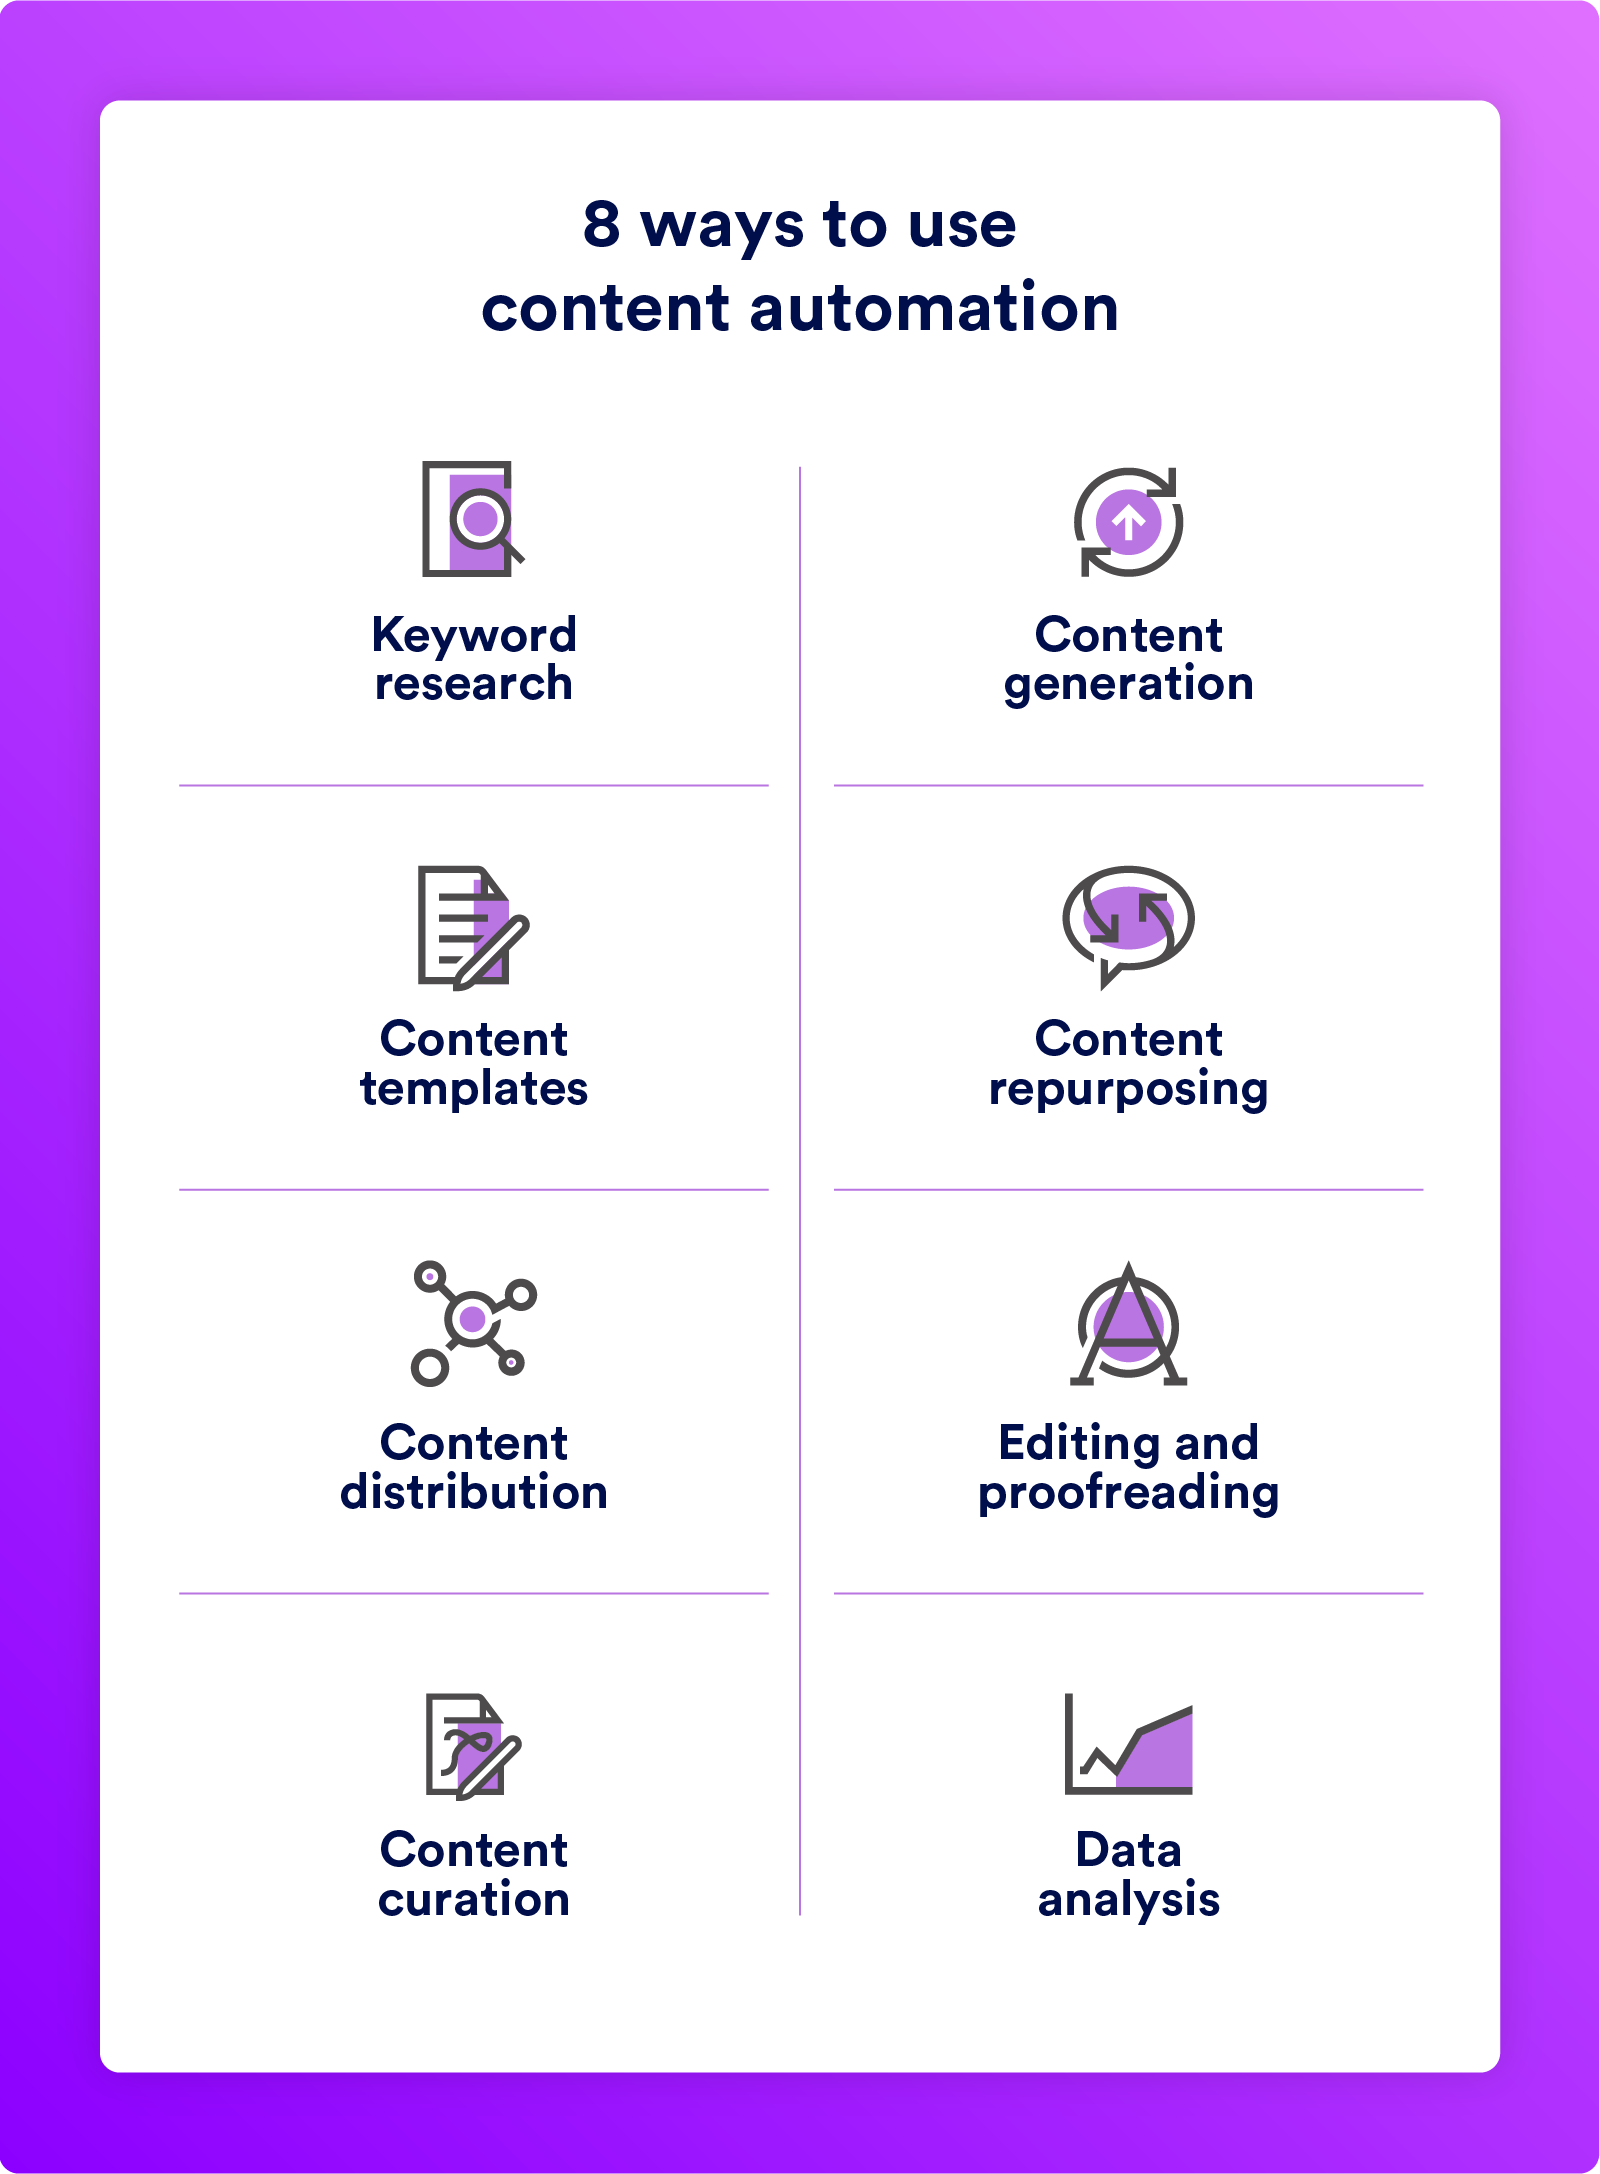 Ways to use content automation.